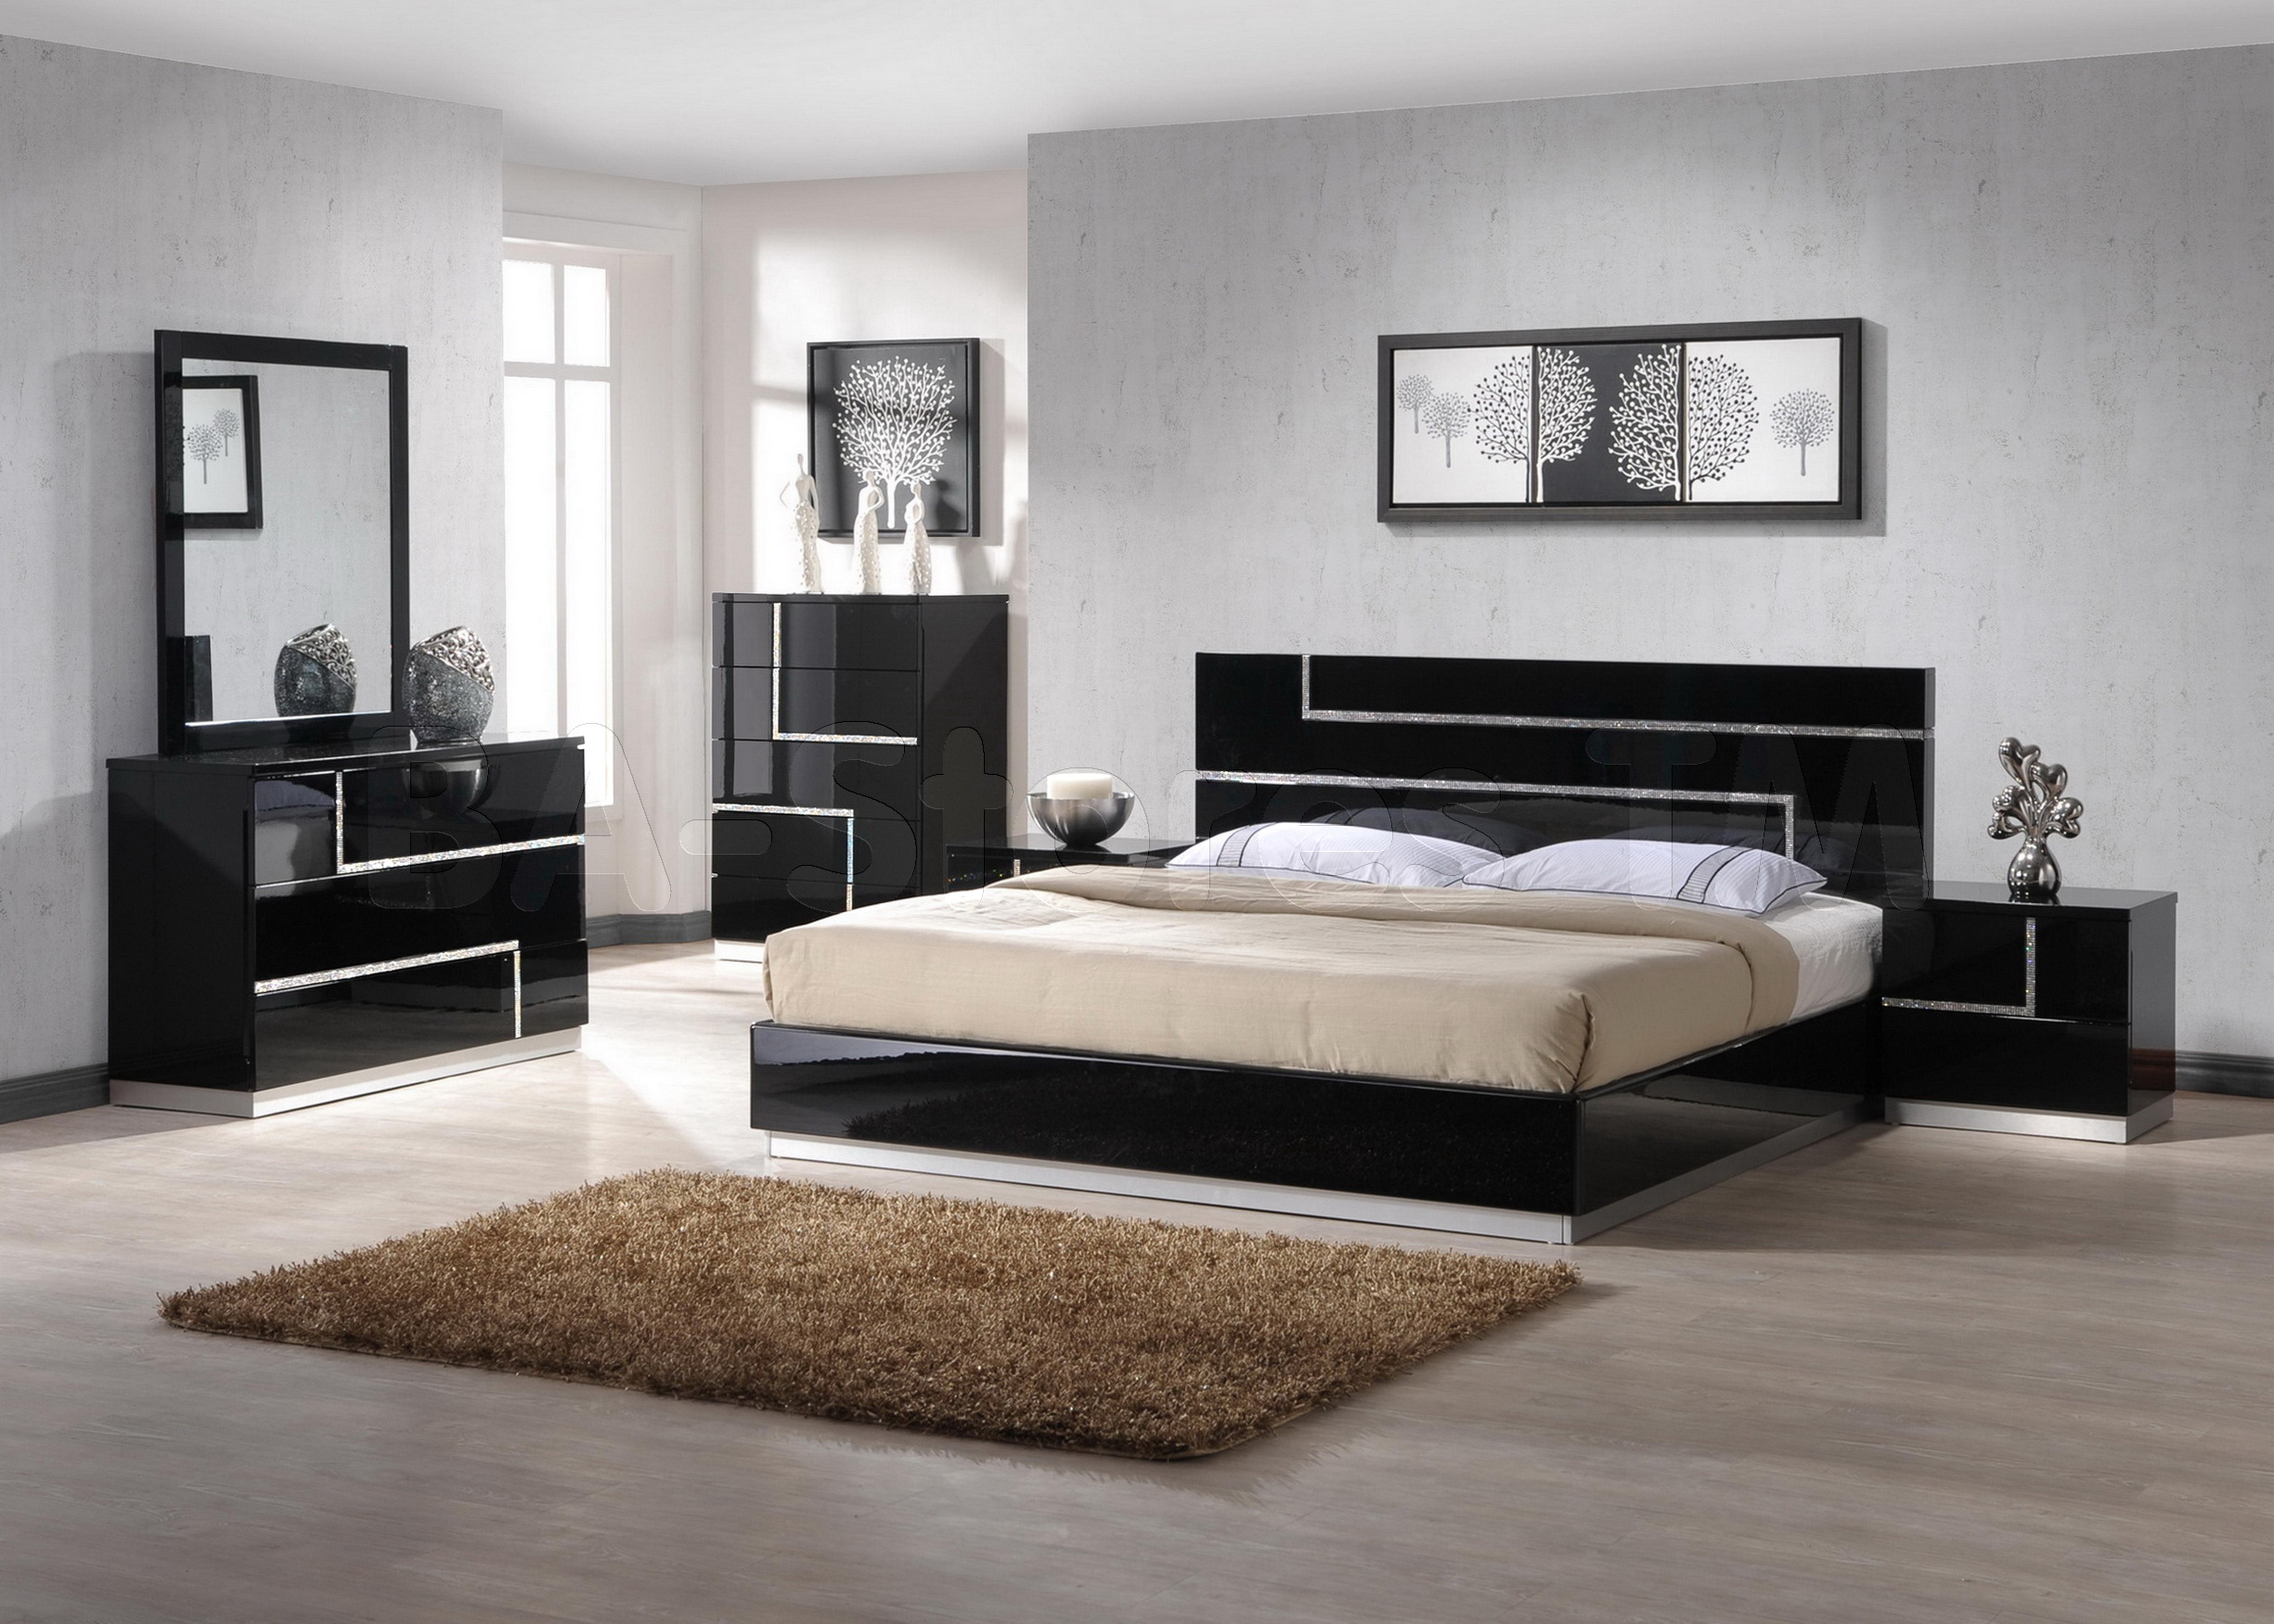 Top 52 Preeminent Modern Furniture Contemporary Silver Set Bedroom with regard to sizing 2450 X 1750